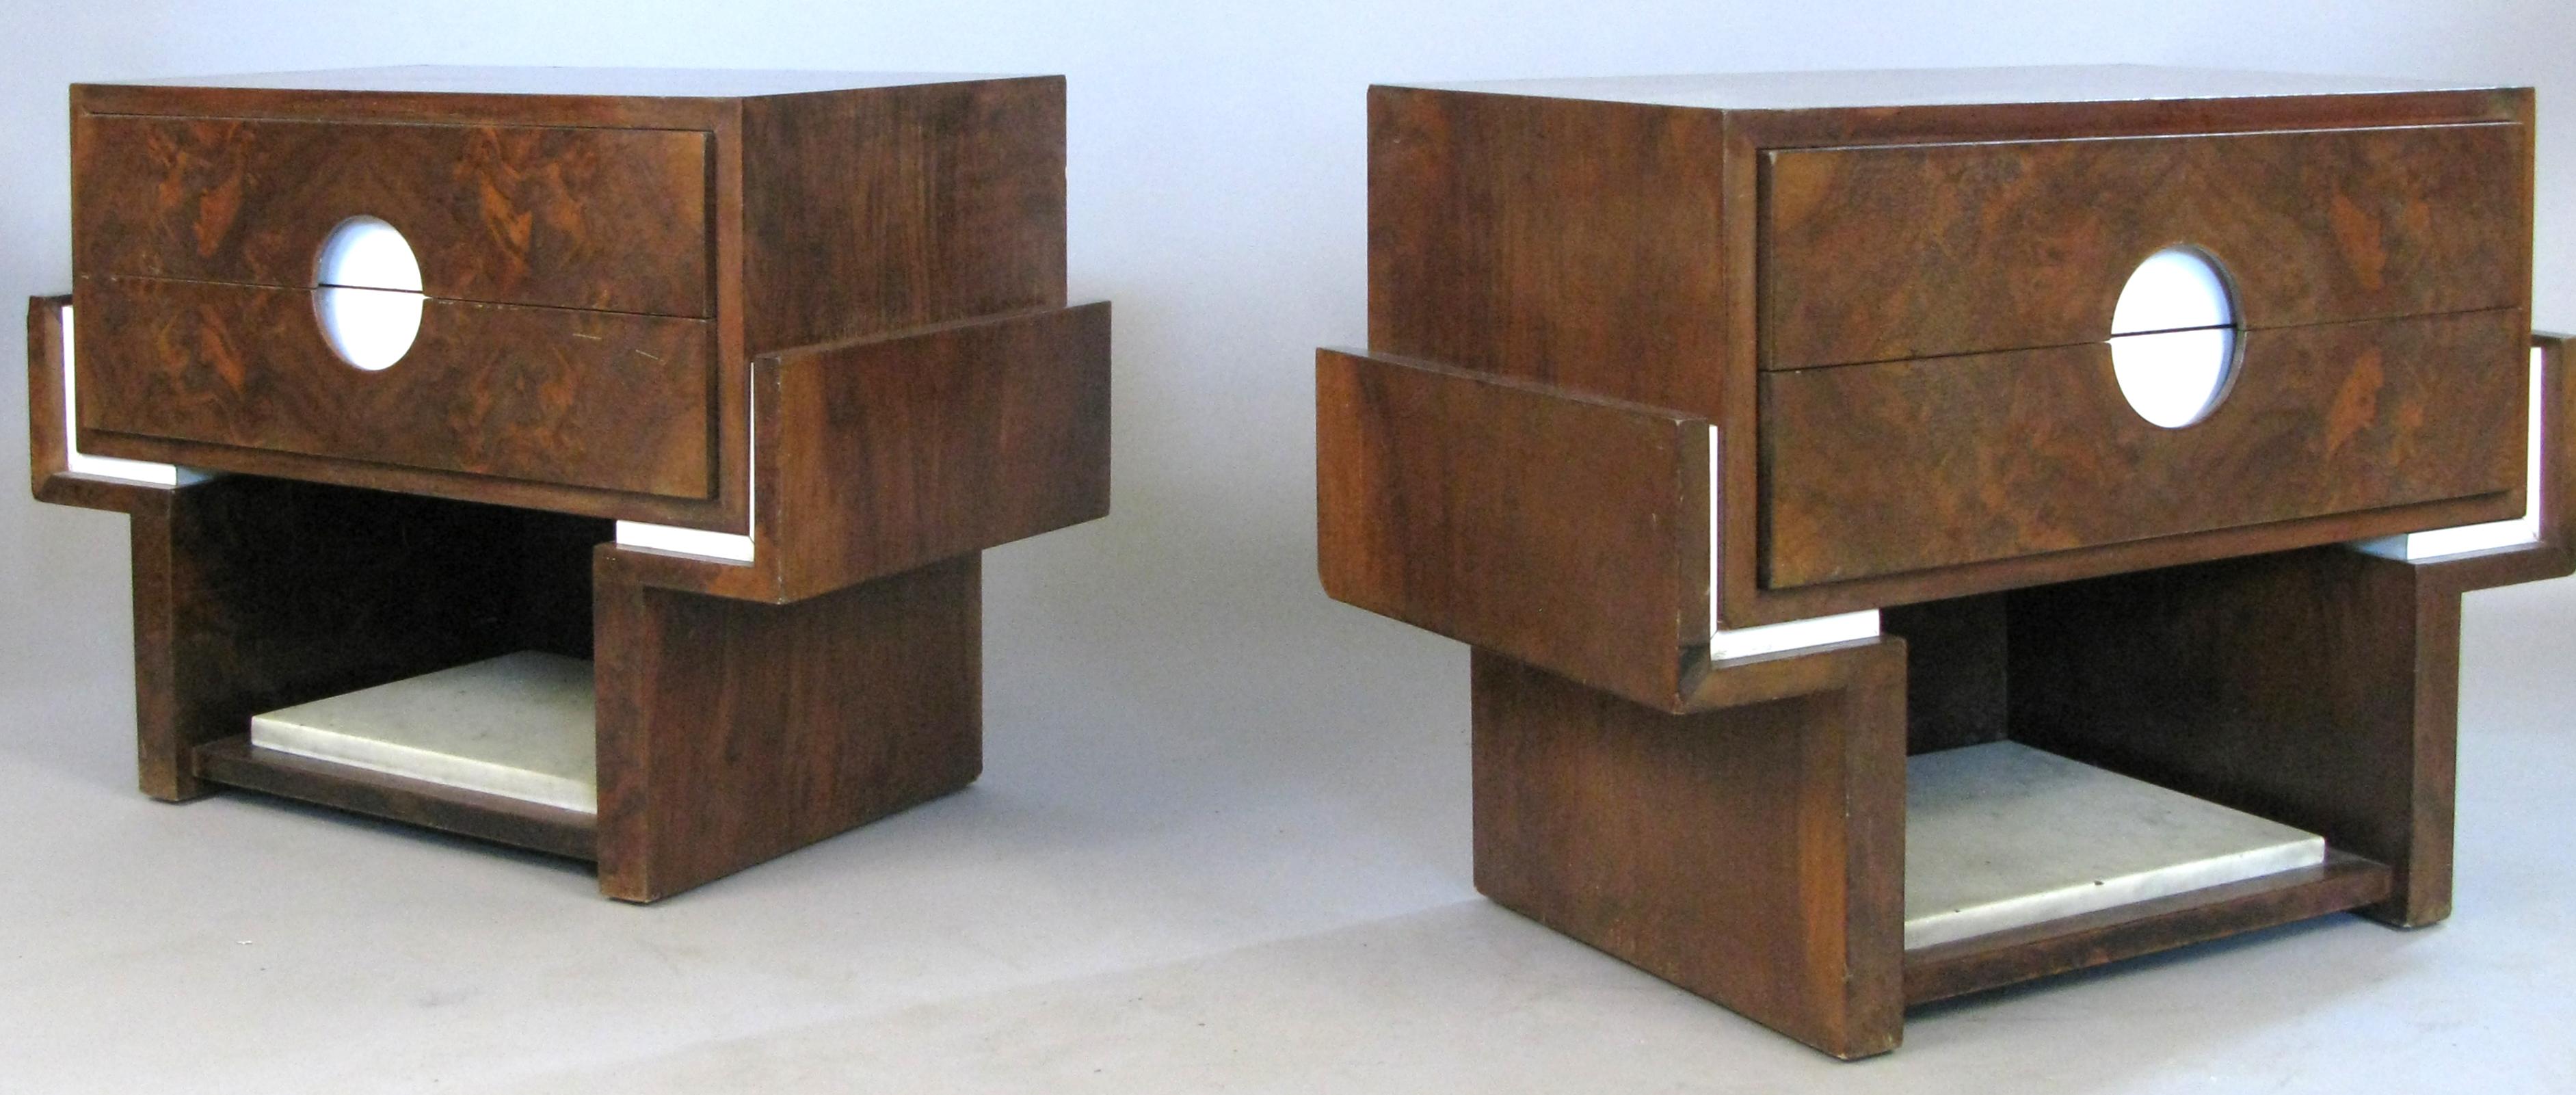 A beautiful pair of 1940s nightstands, with gorgeous bookmatched rosewood veneer, and a marble panel in the open space below the drawers. Each stand has a pair of drawers, with open cutout panels forming the handles, and white laminate trim accents.